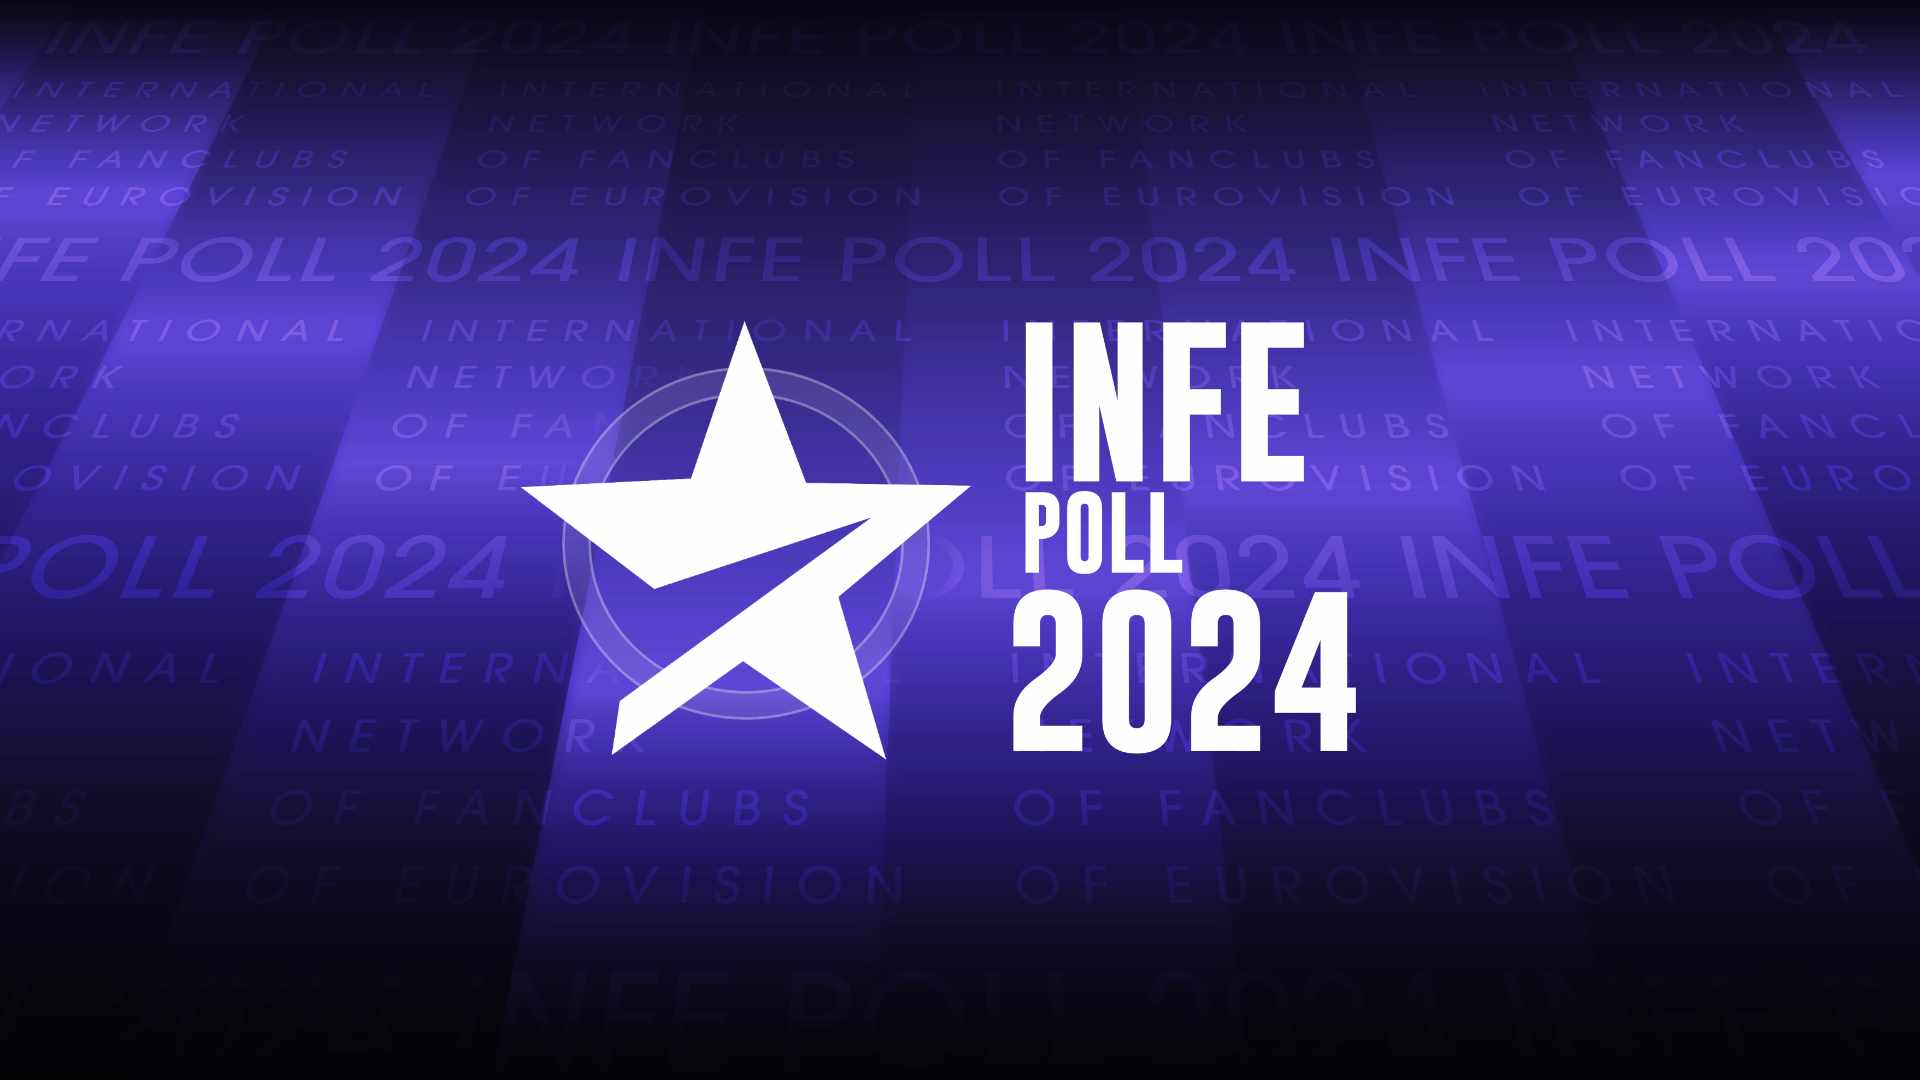 Eurovision 2024 INFE Poll 2024 INFE Rest of the World Delivers the Final Verdict!